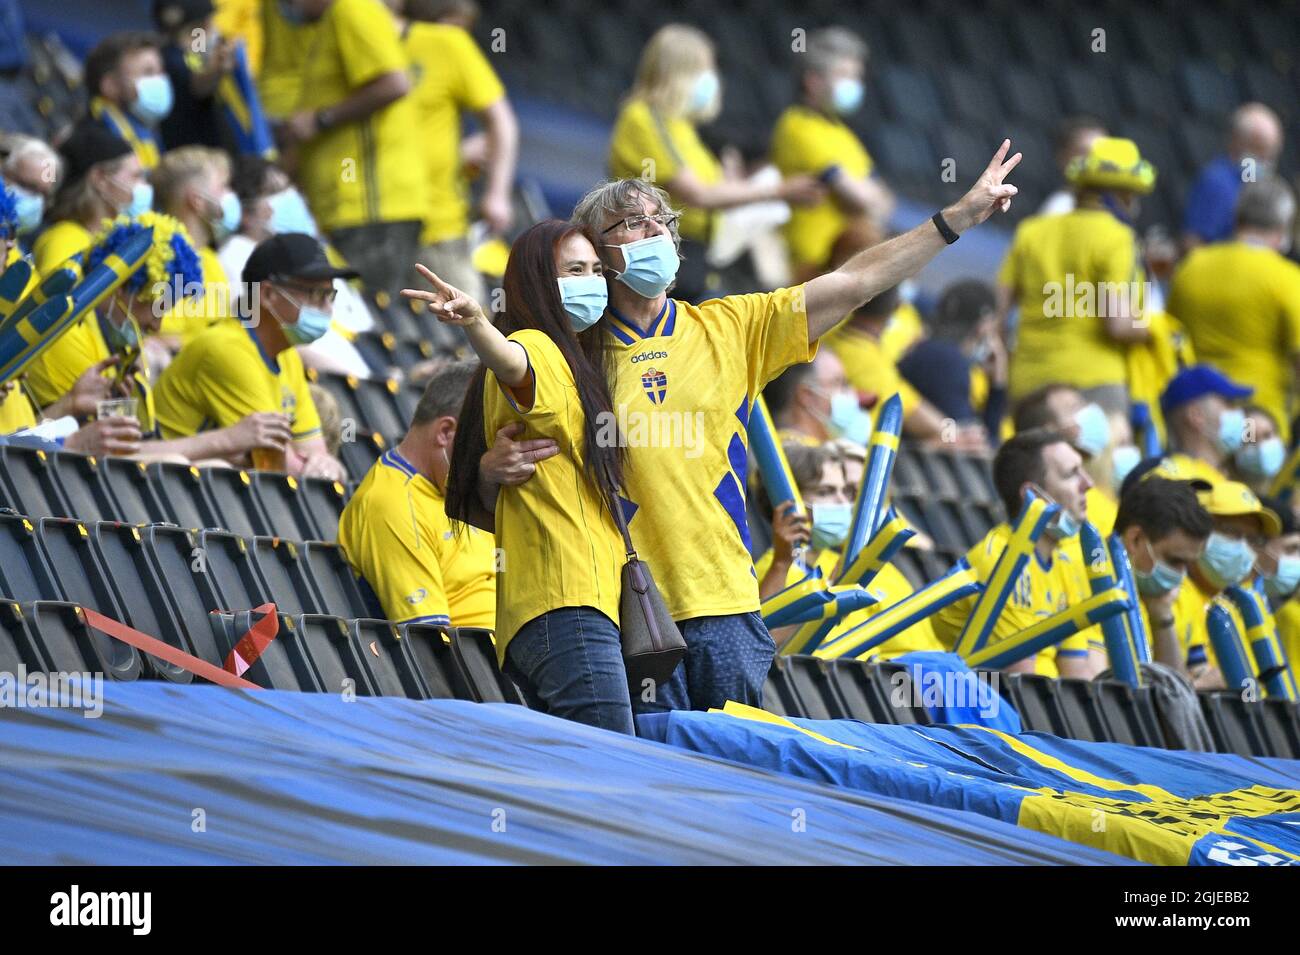 Swedish fans wearing protective masks before the start of the International  Friendly soccer match between Sweden and Armenia at Friends Arena in  Stockholm, Sweden, on June 5, 2021. Photo: Claudio Bresciani /